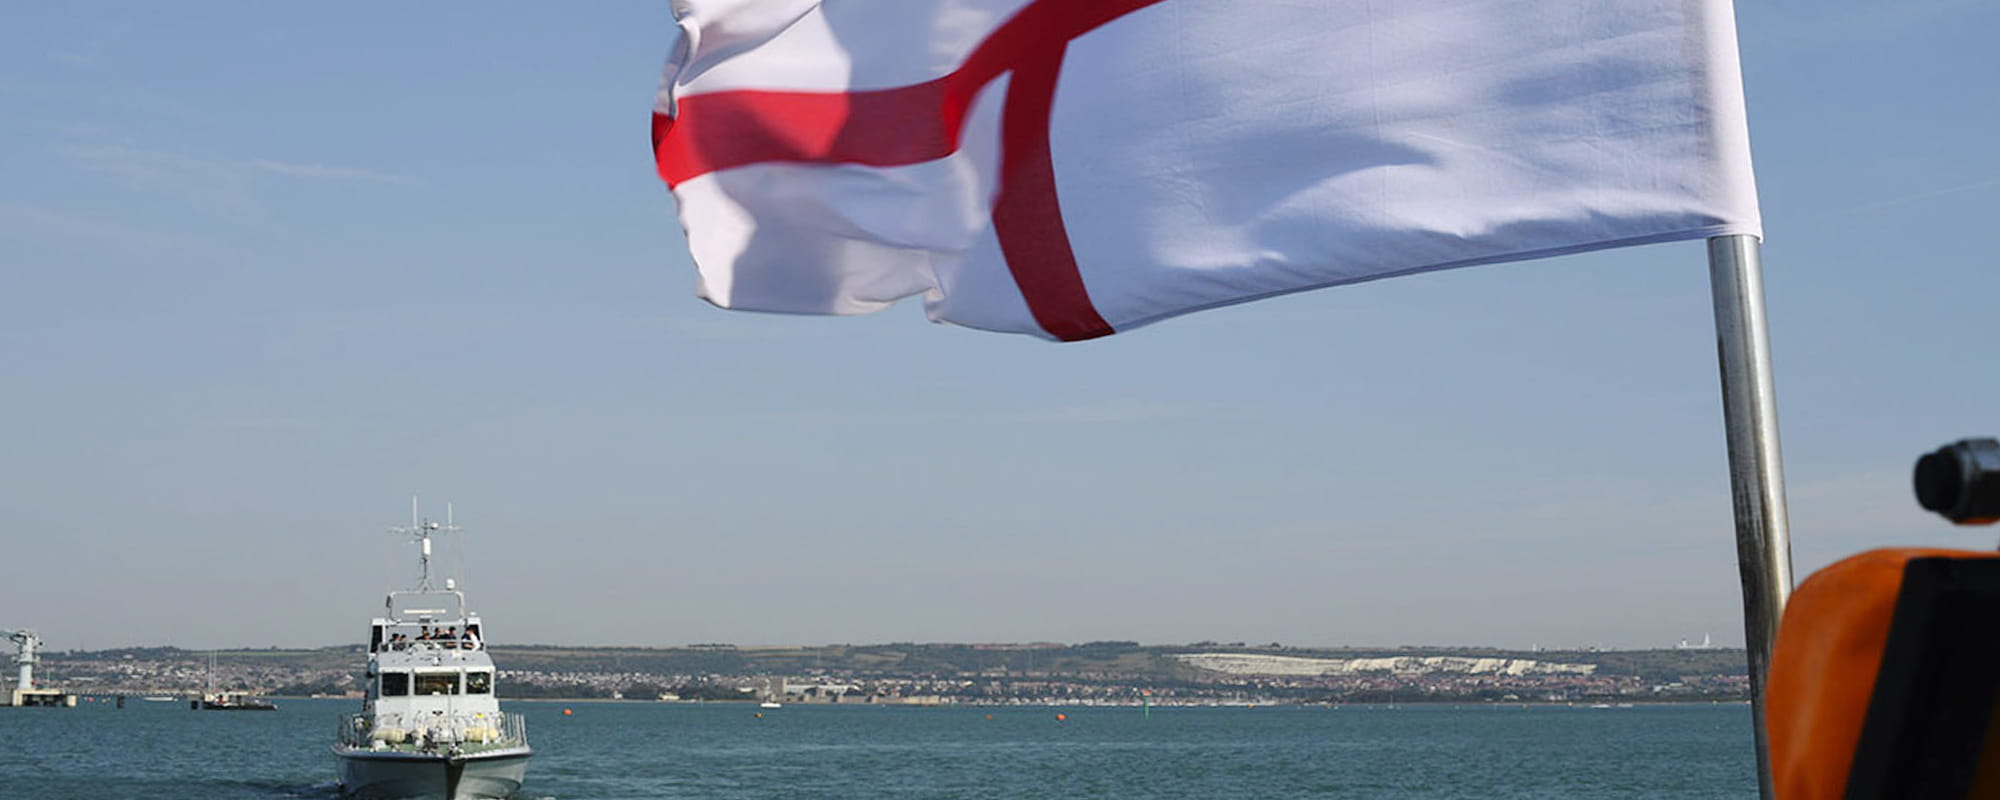 White Ensign raised with a P2000 ship sailing in the background